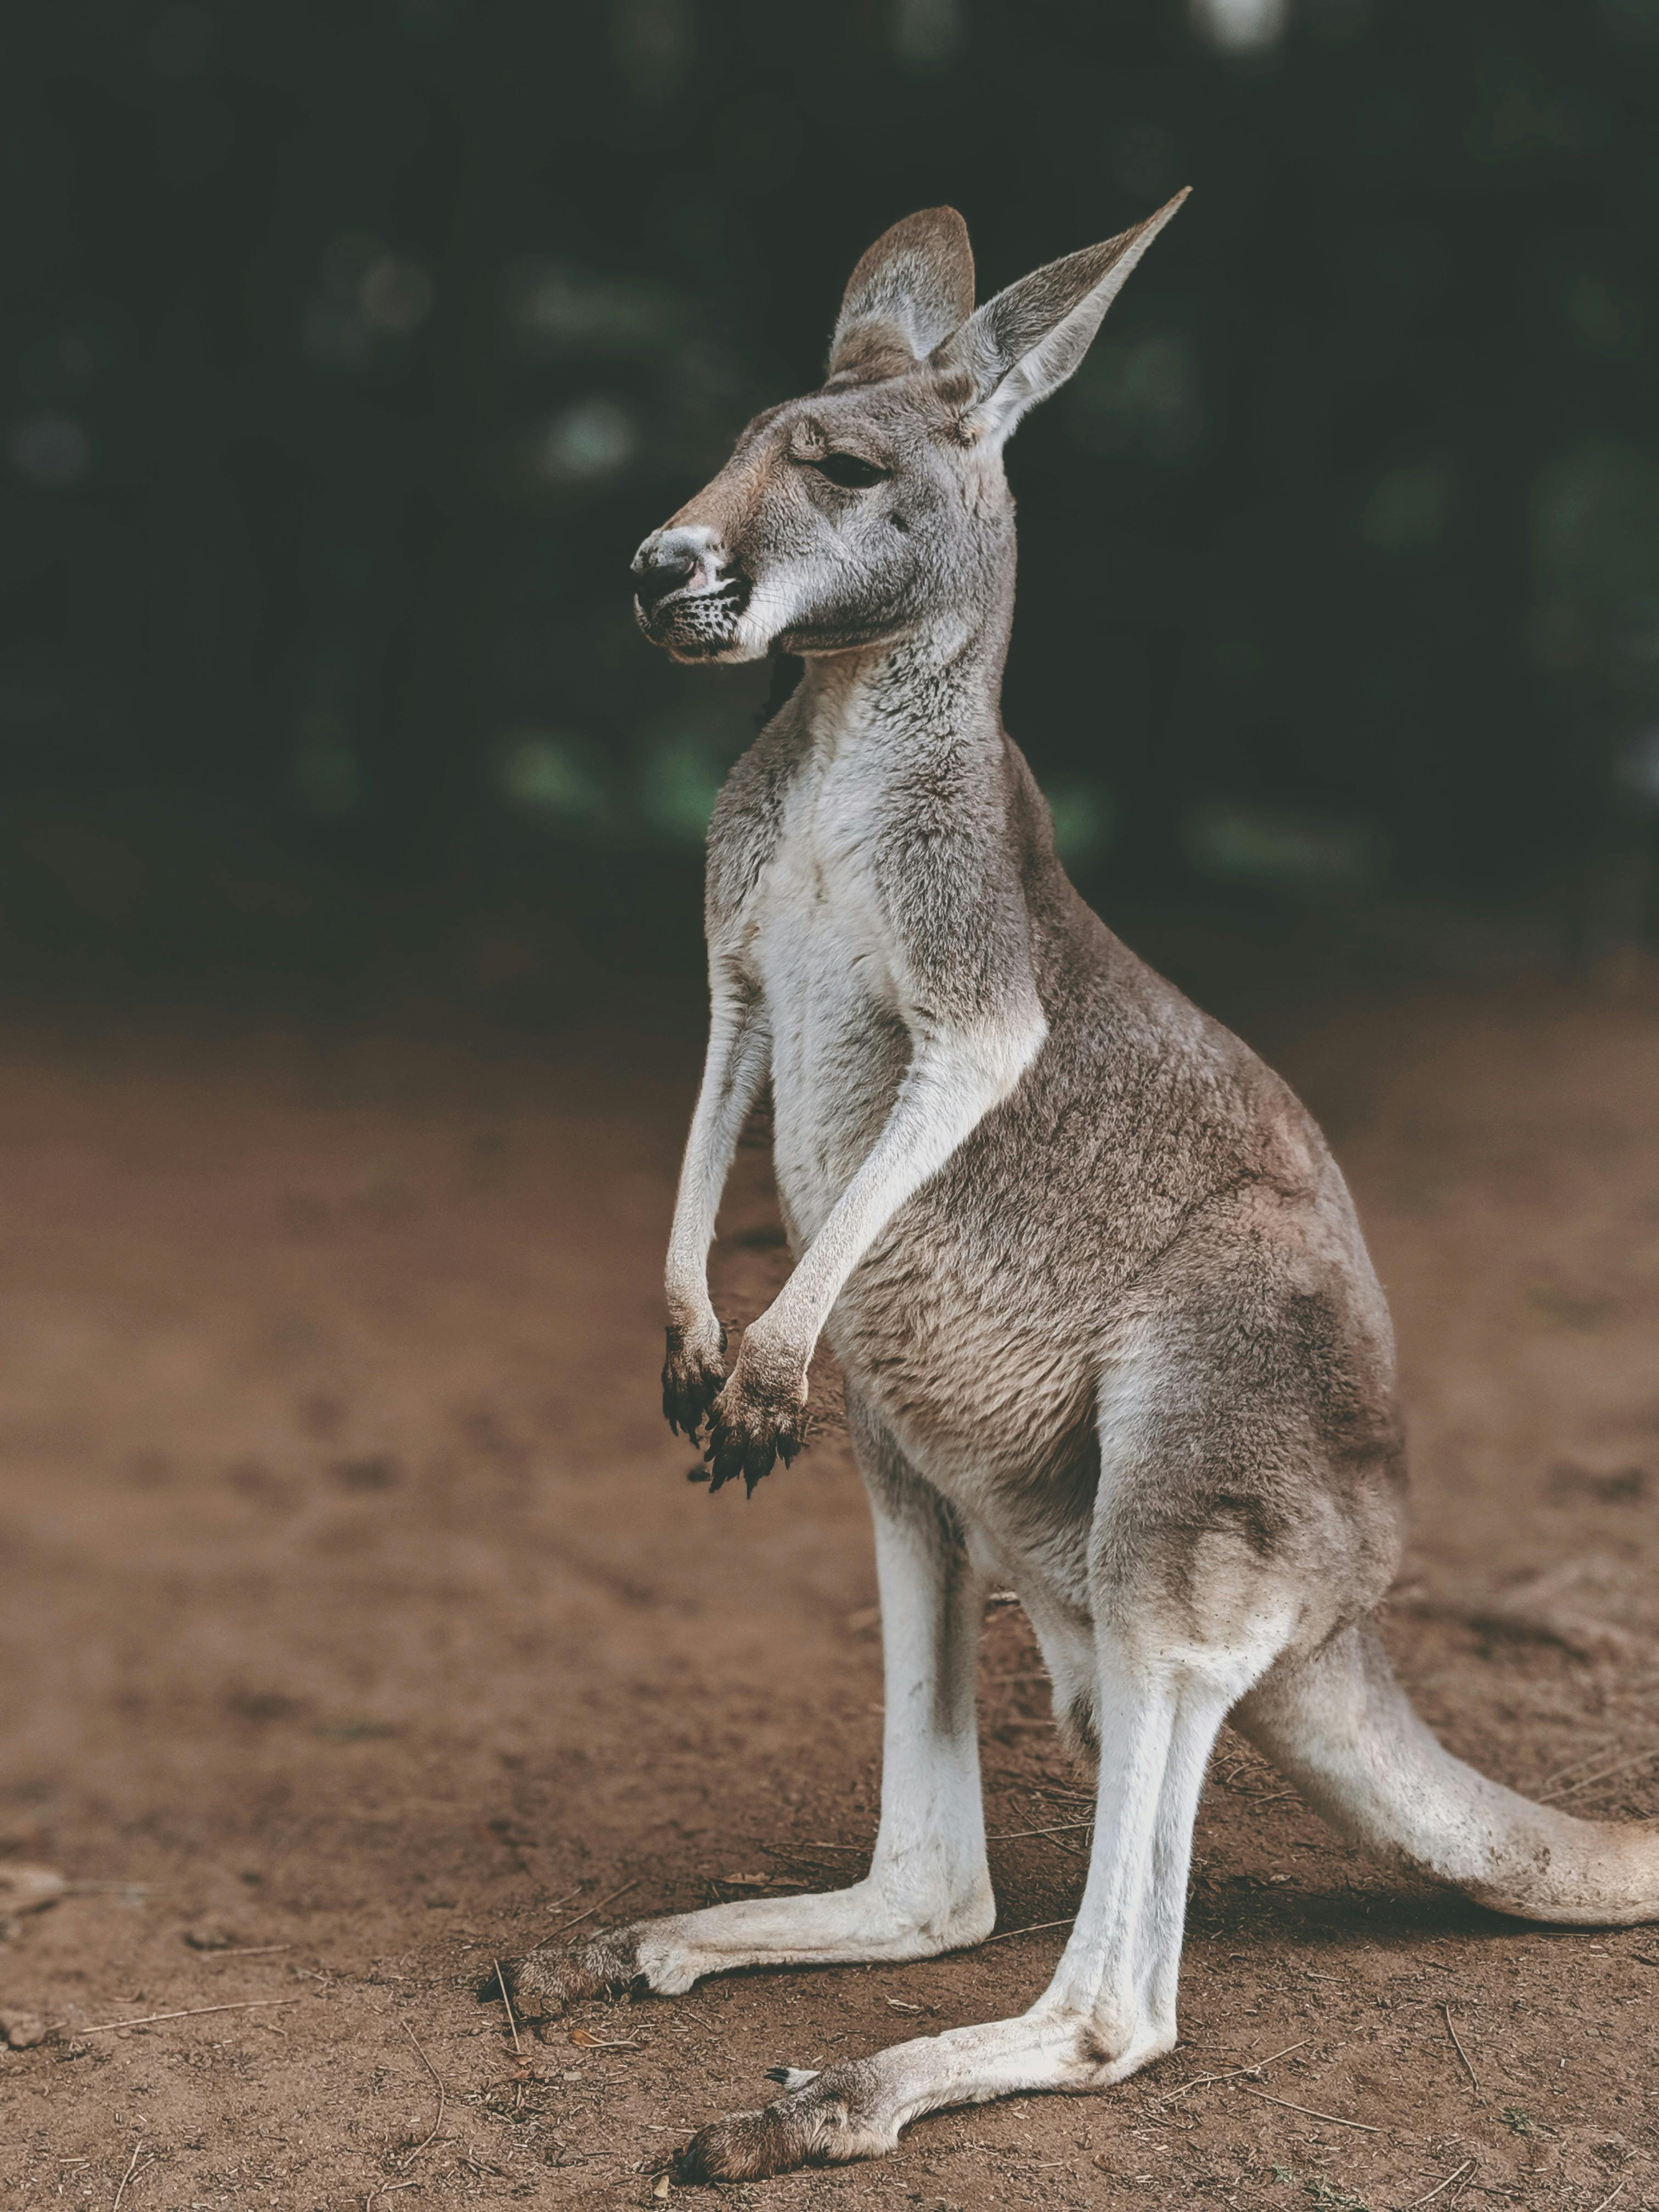 Kangaroo 4K wallpapers for your desktop or mobile screen free and easy to  download